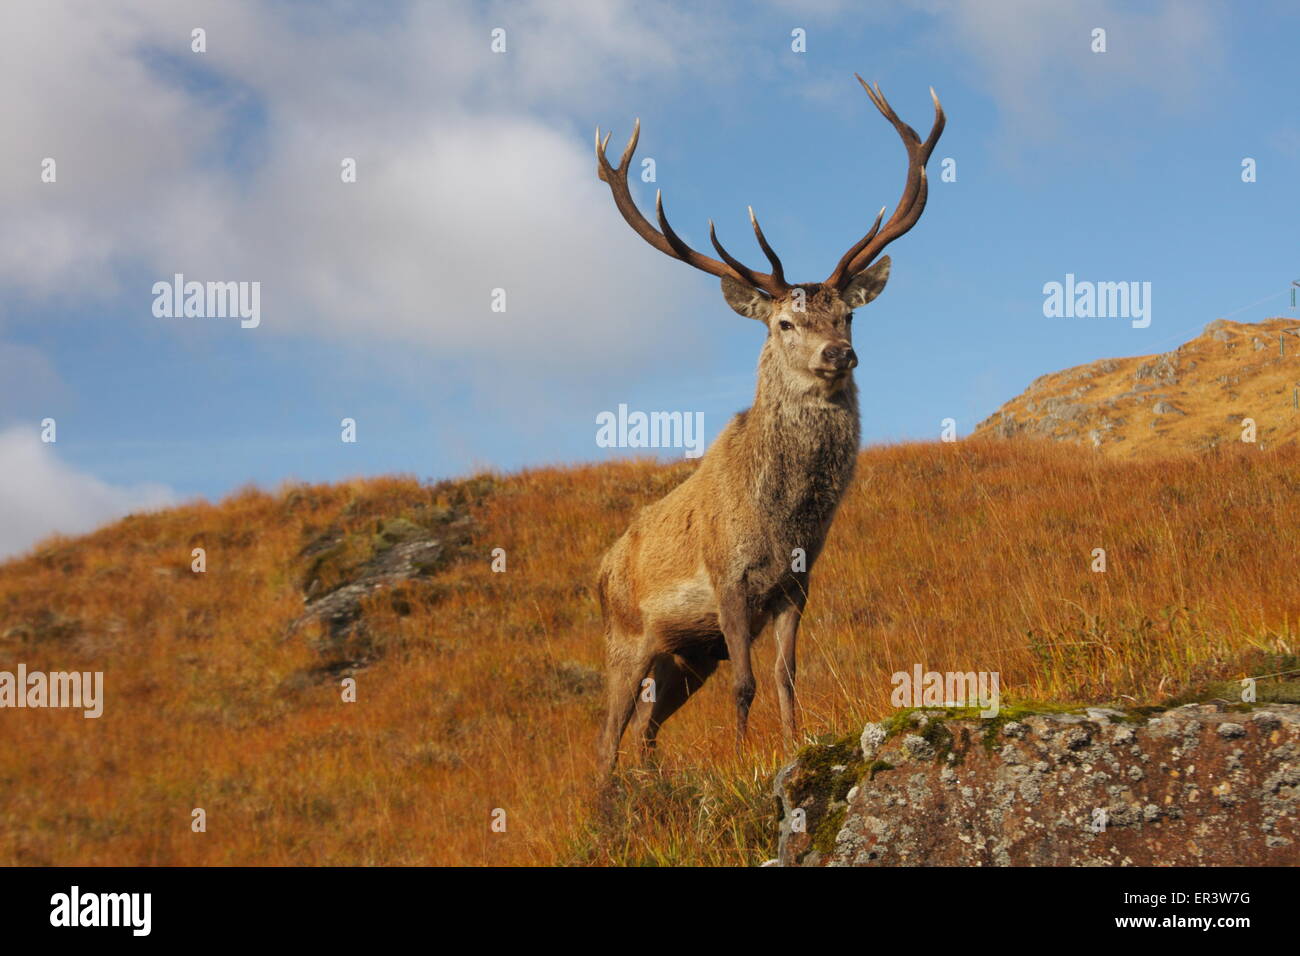 Magnificent Wild Red Deer Stag with 12 point antlers during the Autumn rut in the Scottish Highlands. Stock Photo